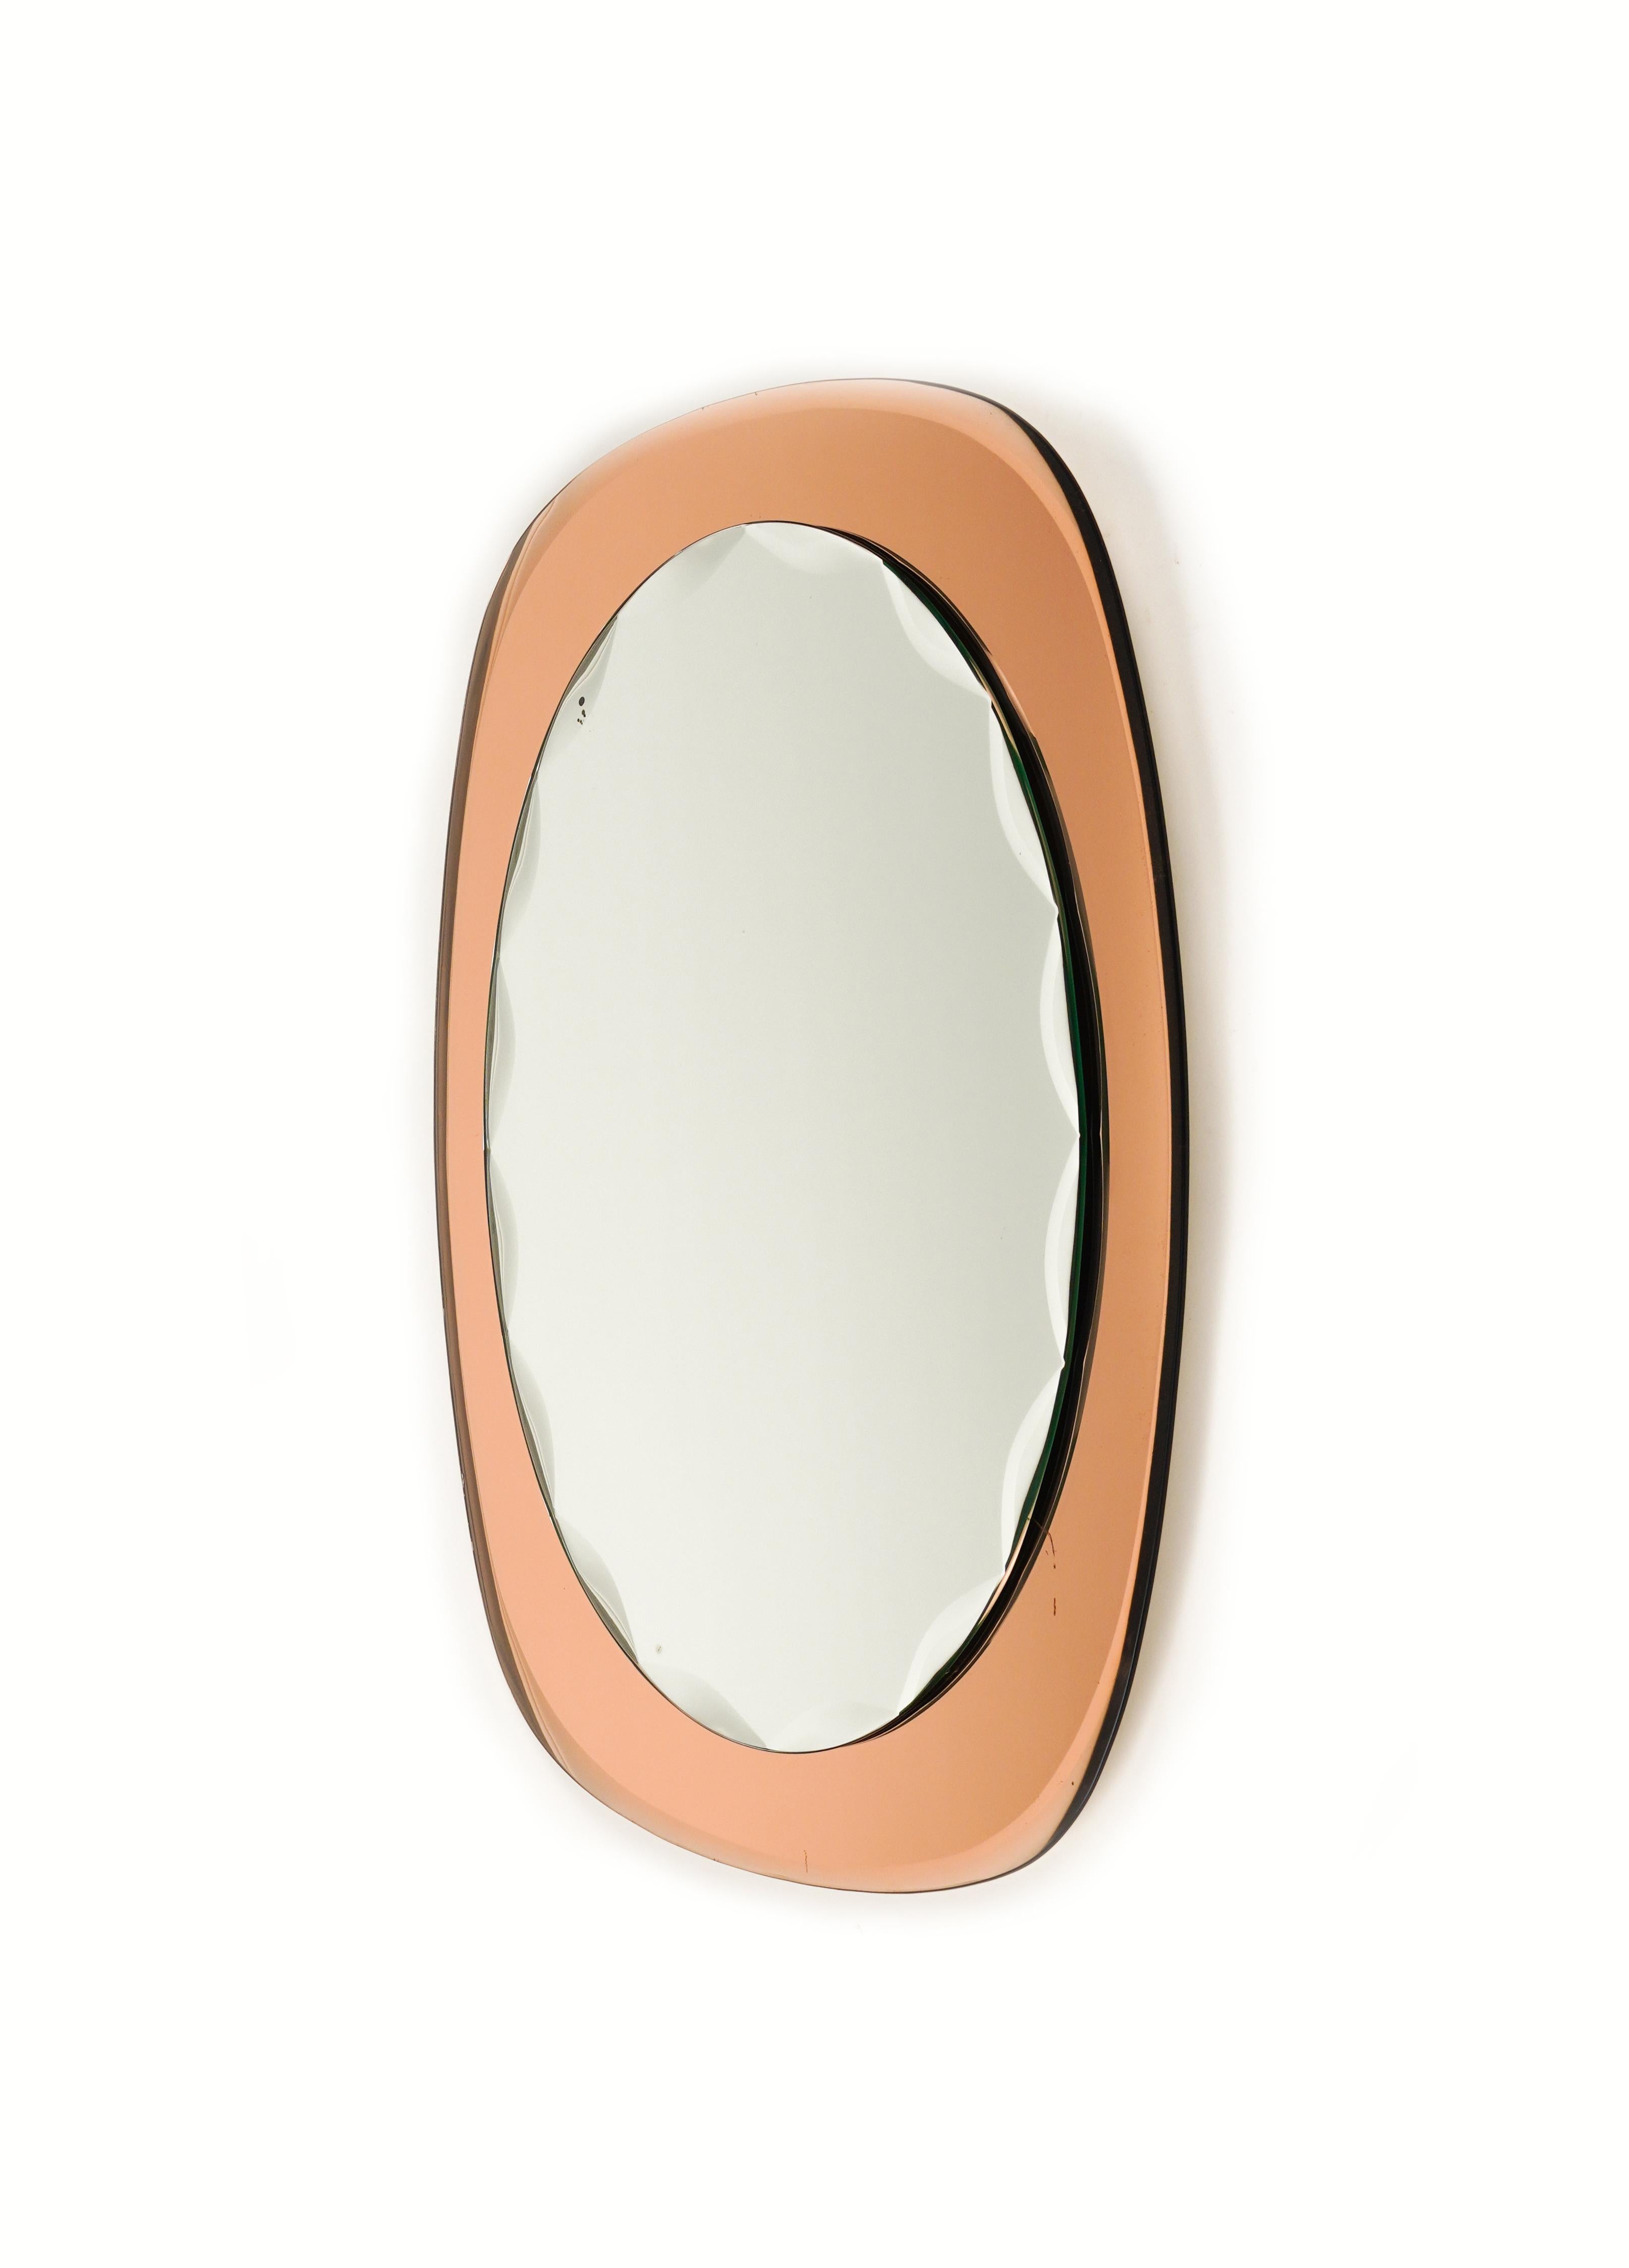 Mid-20th Century Midcentury Oval Wall Mirror rose gold Glass Frame by Cristal Arte, Italy 1960s For Sale